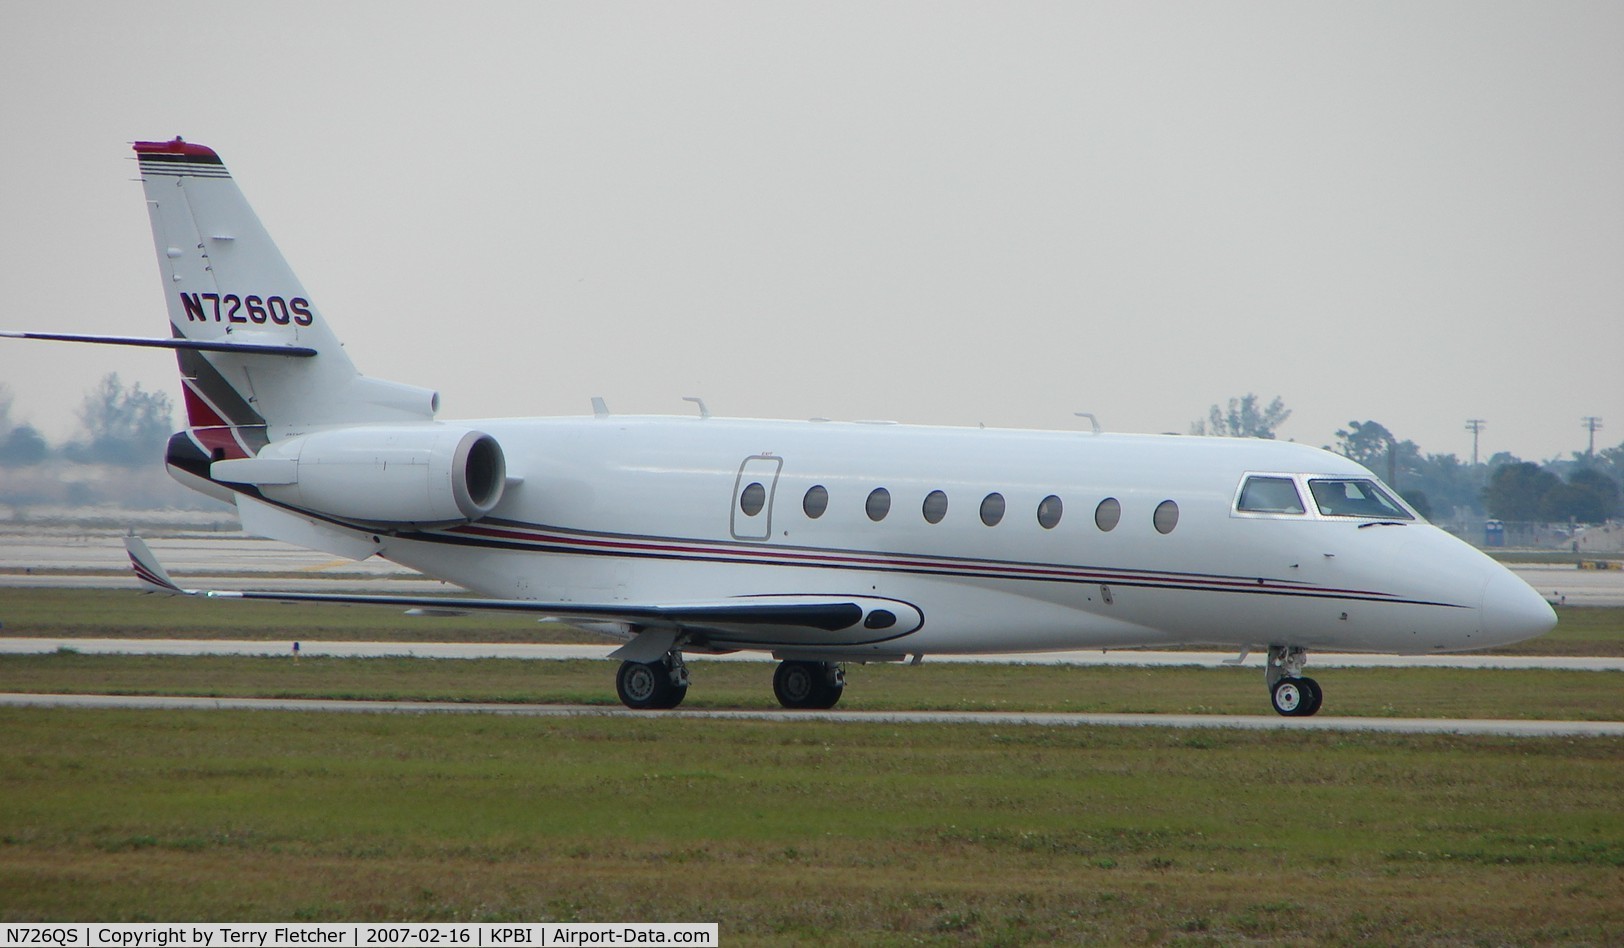 N726QS, 2005 Israel Aircraft Industries Gulfstream 200 C/N 108, part of the Friday afternoon arrivals 'rush' at PBI